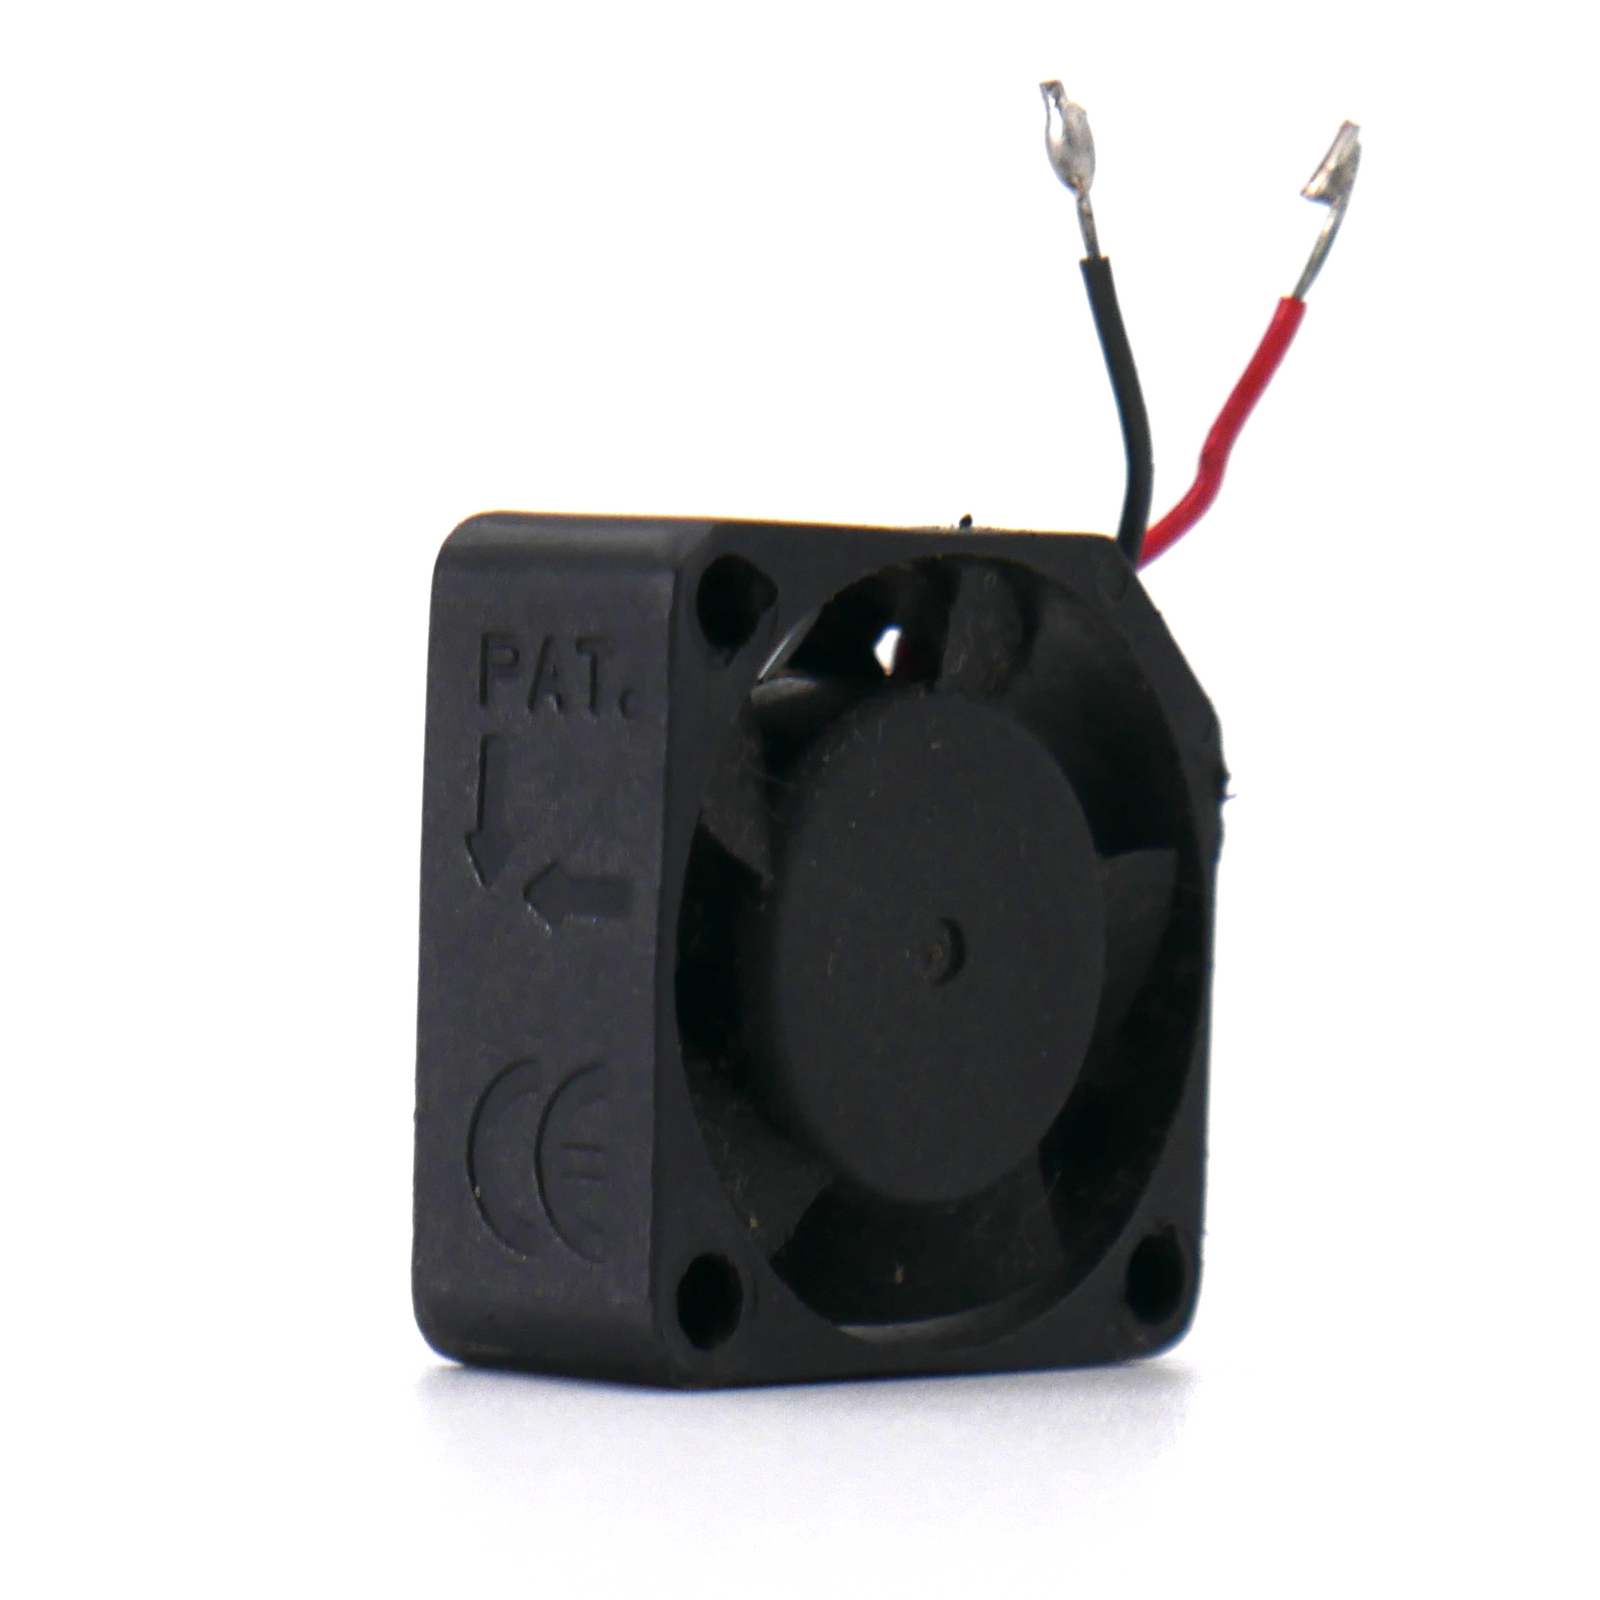 Red and black induction start switch for induction liners